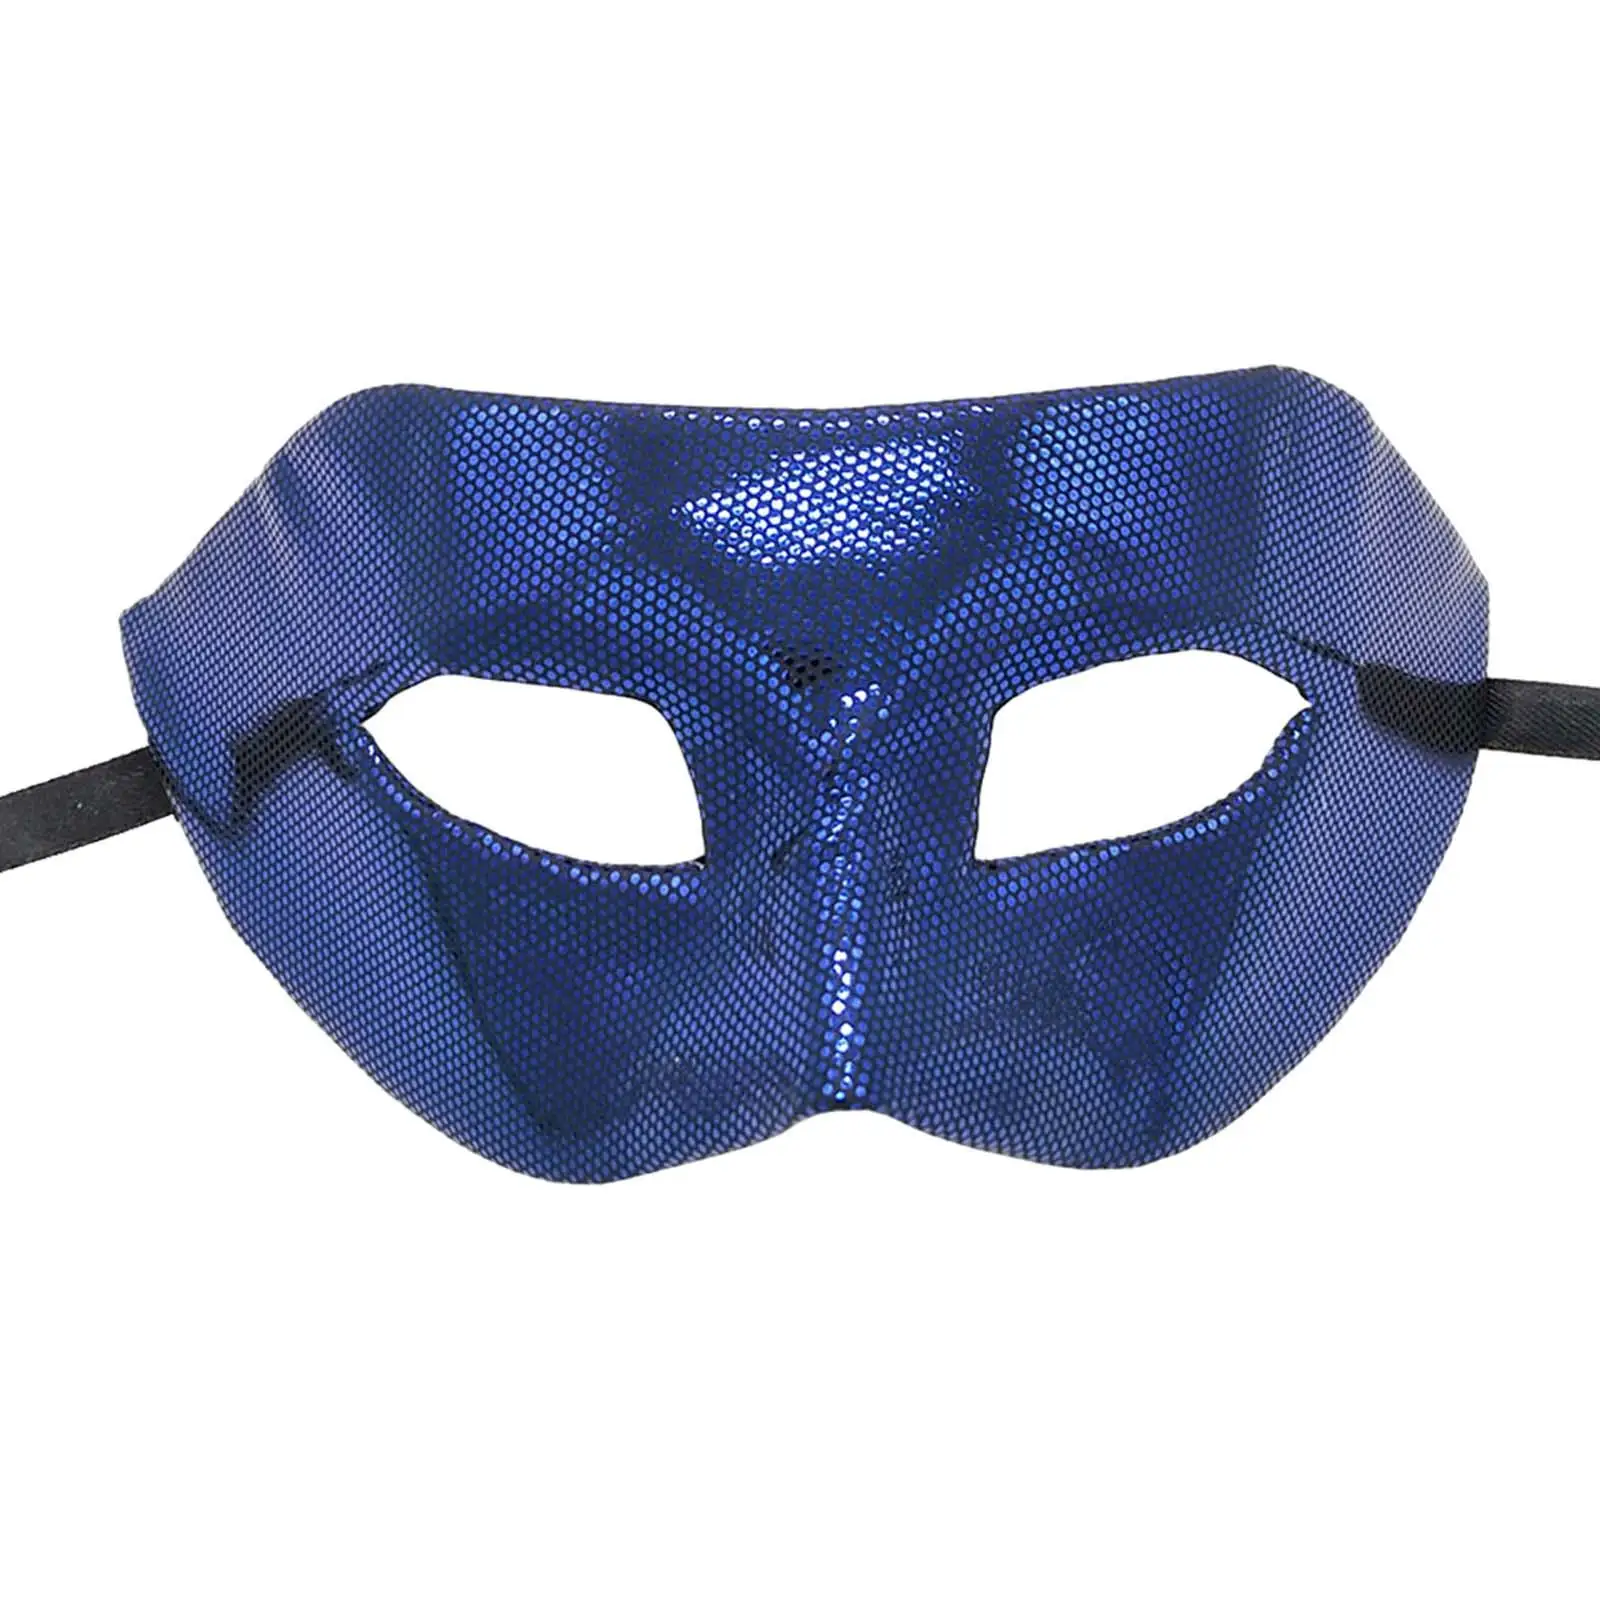 Masquerade Mask Cosplay Props for Fancy Dress Stage Performance Halloween